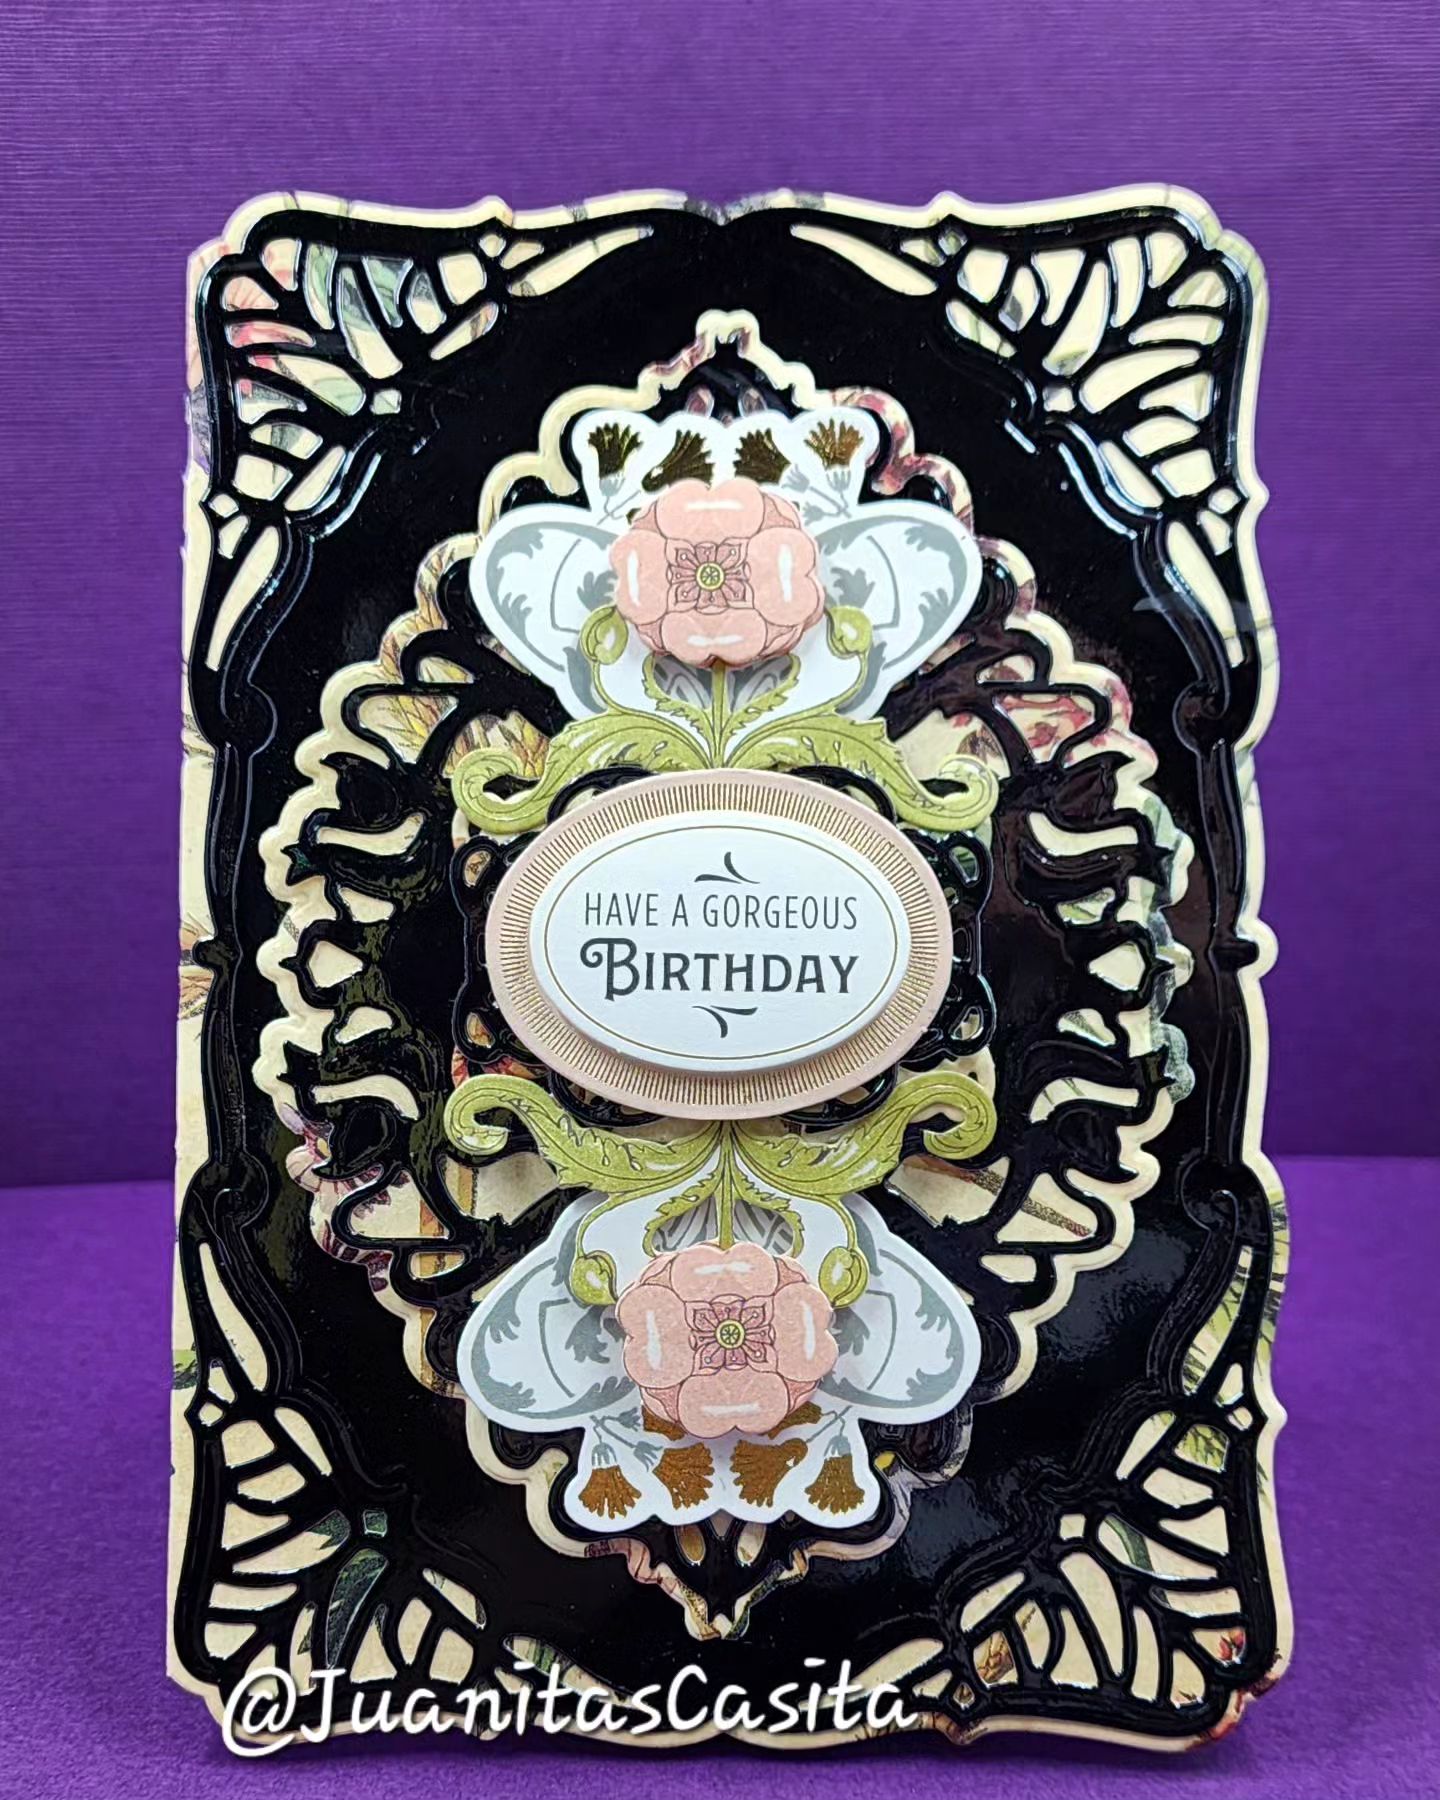 A black and gold birthday card with flowers on it.